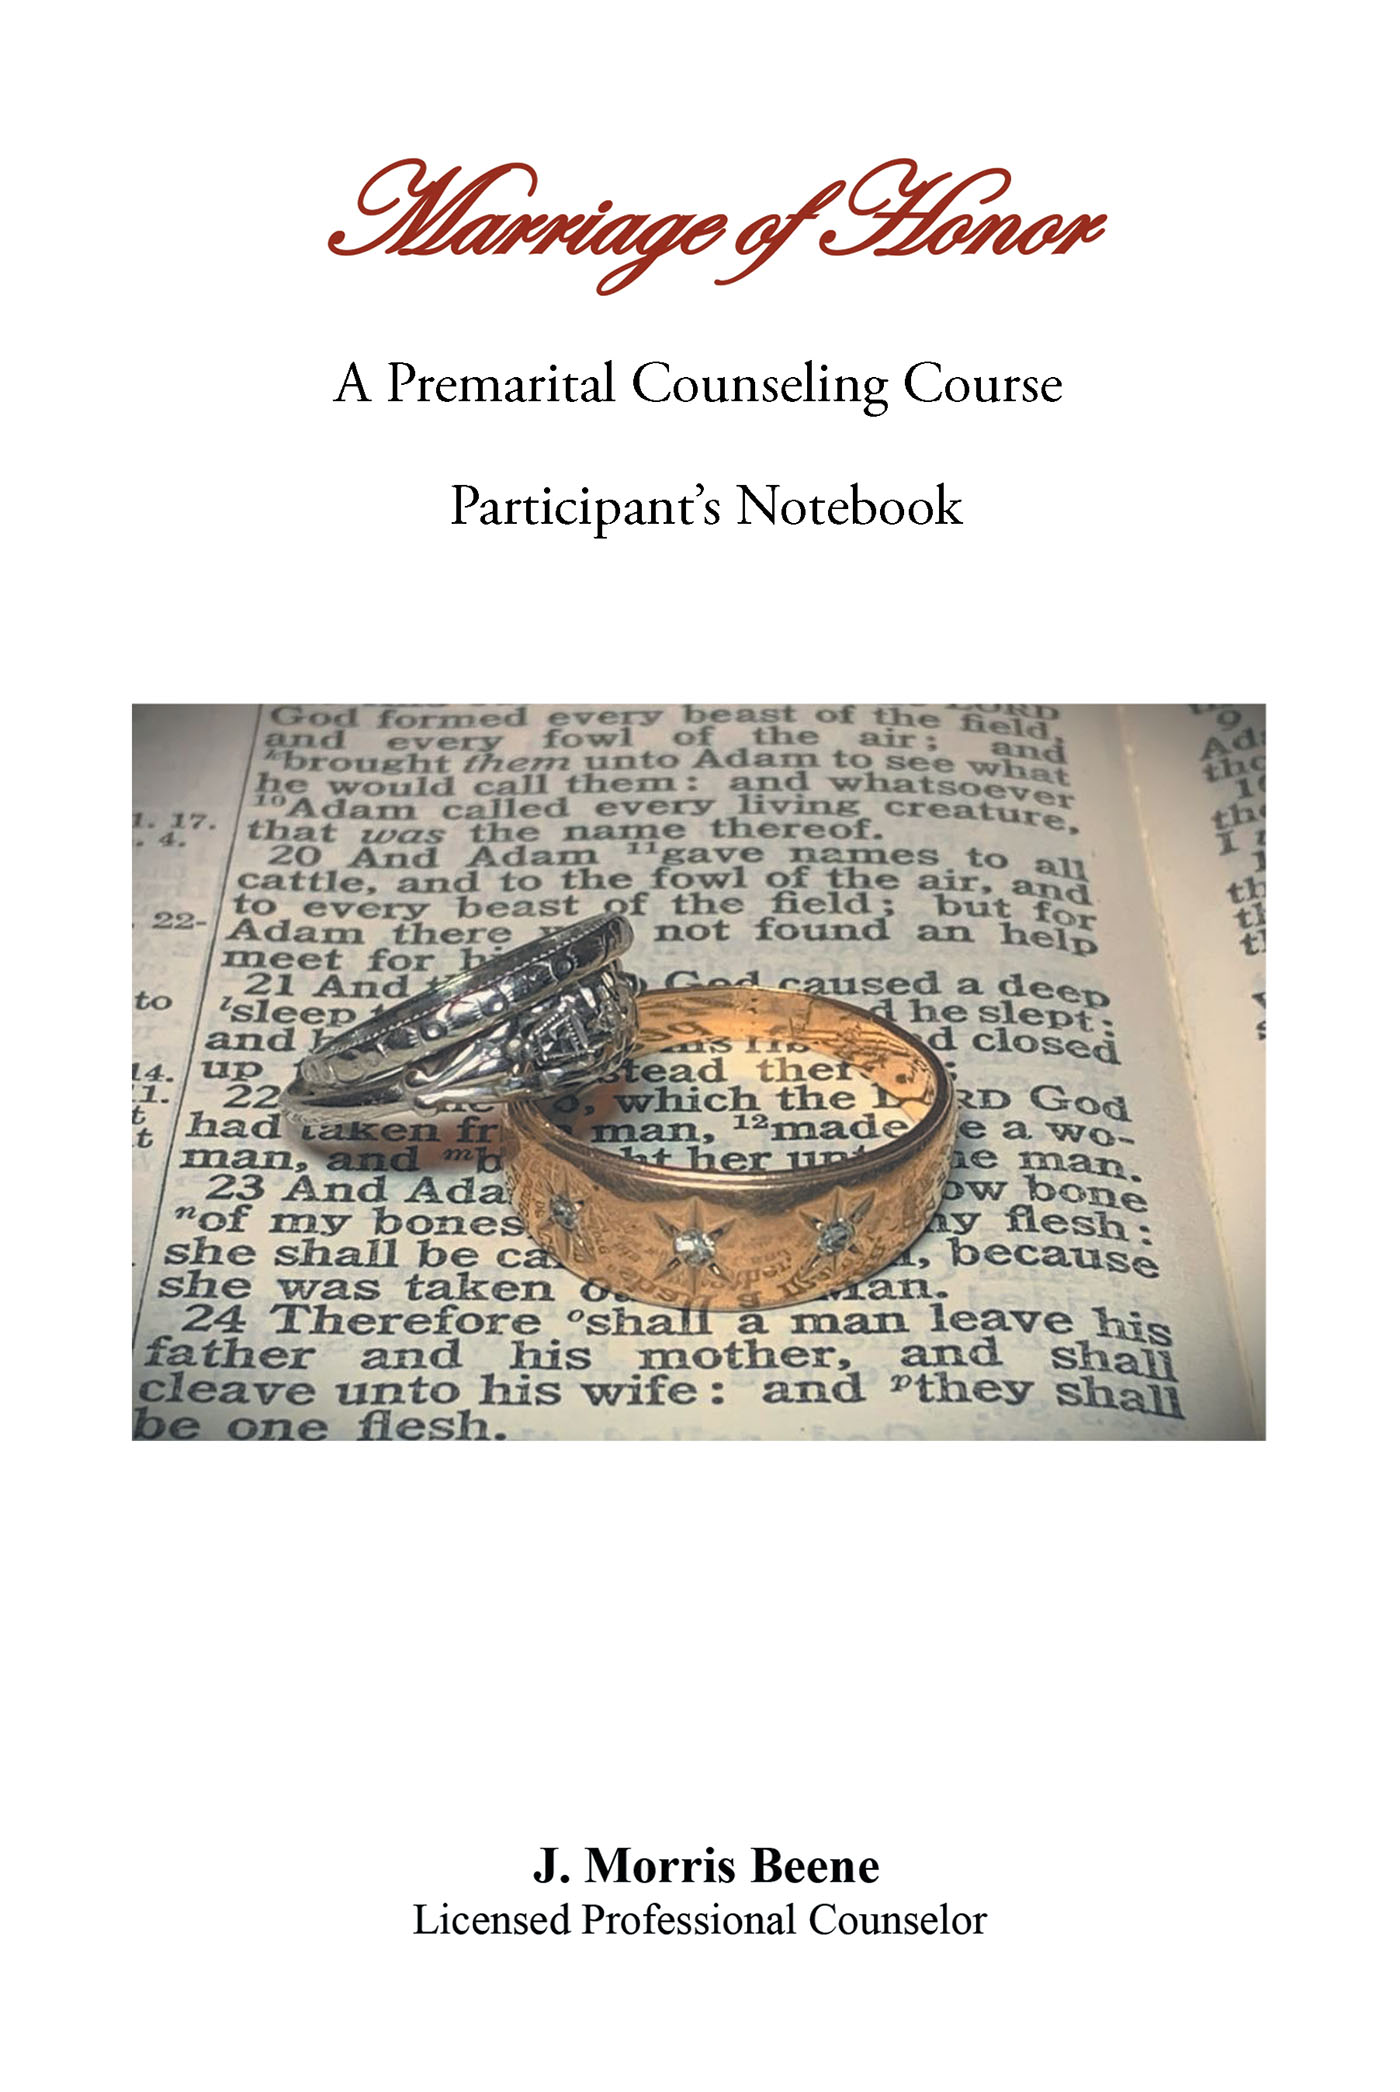 Author J. Morris Beene’s New Book, "Marriage of Honor: A Premarital Counseling Course Participant's Notebook," Holds the Tools for Couples to Build a Lasting Marriage